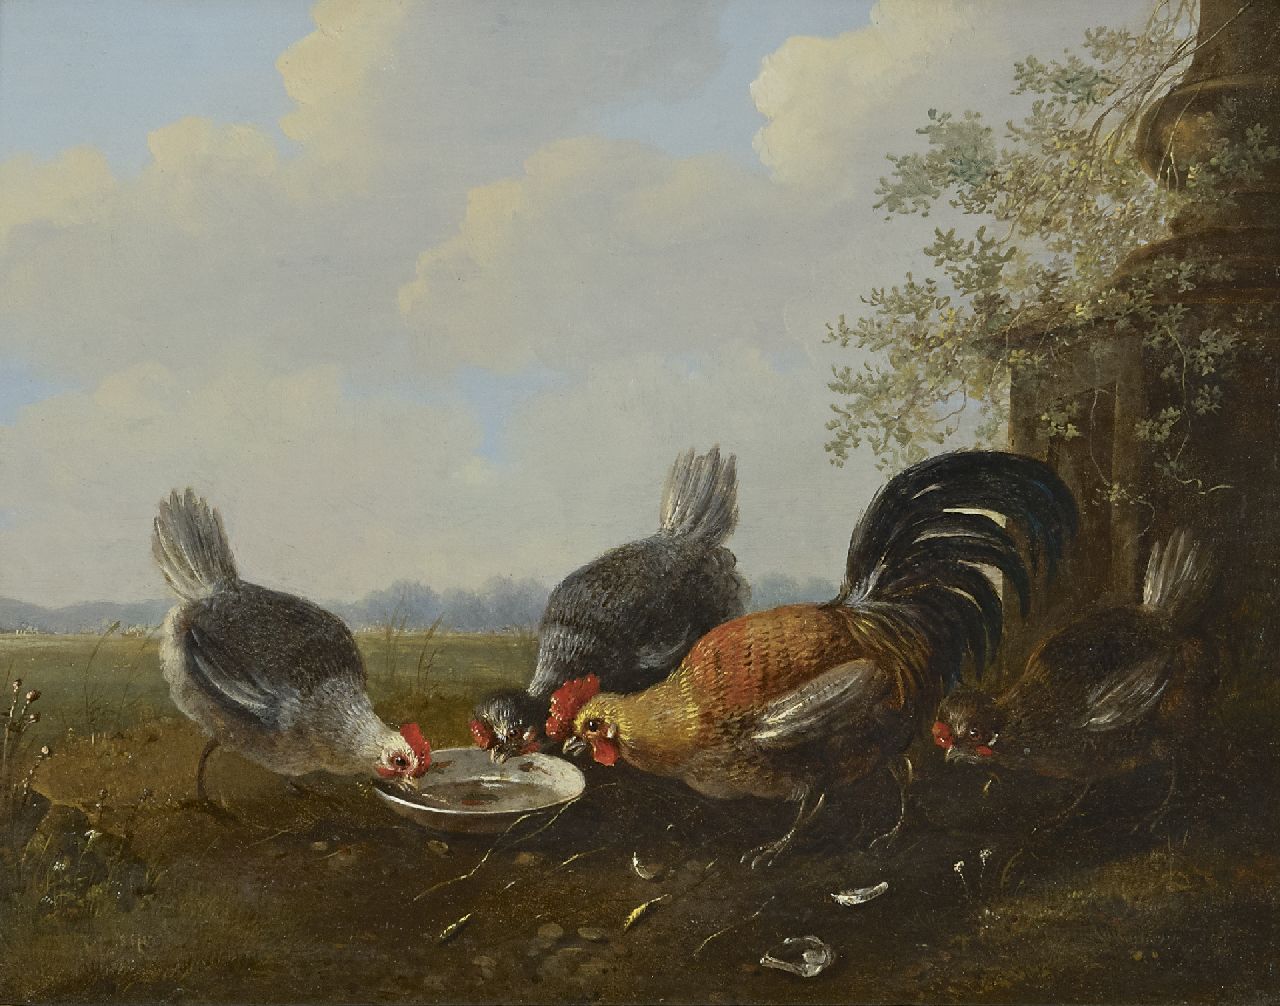 Verhoesen A.  | Albertus Verhoesen | Paintings offered for sale | Four chickens near a waterbowl, oil on panel 22.4 x 27.8 cm